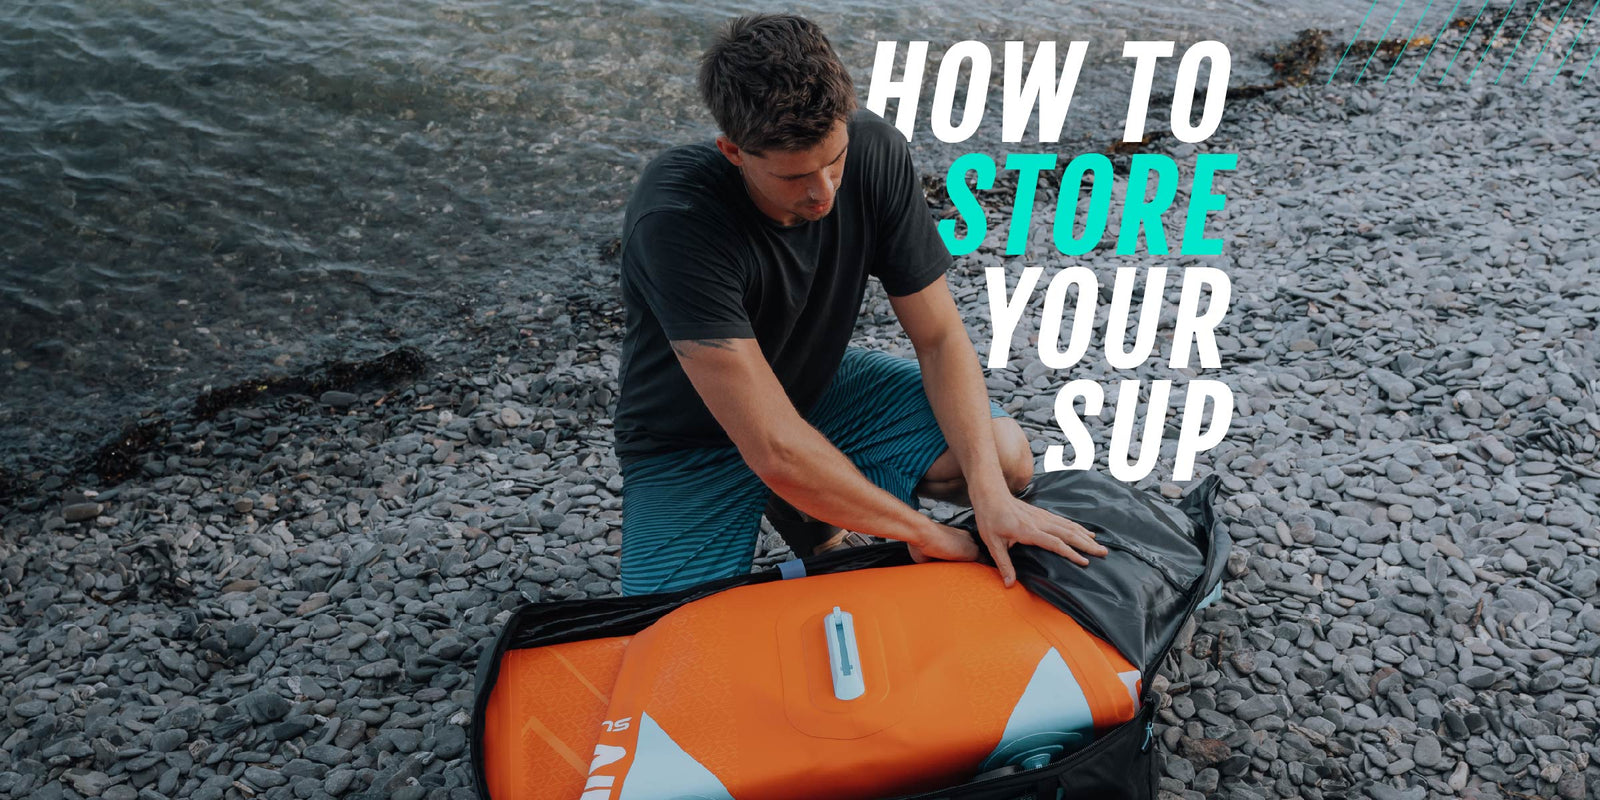 How to Store Your SUP - Paddle Boarding in Winter